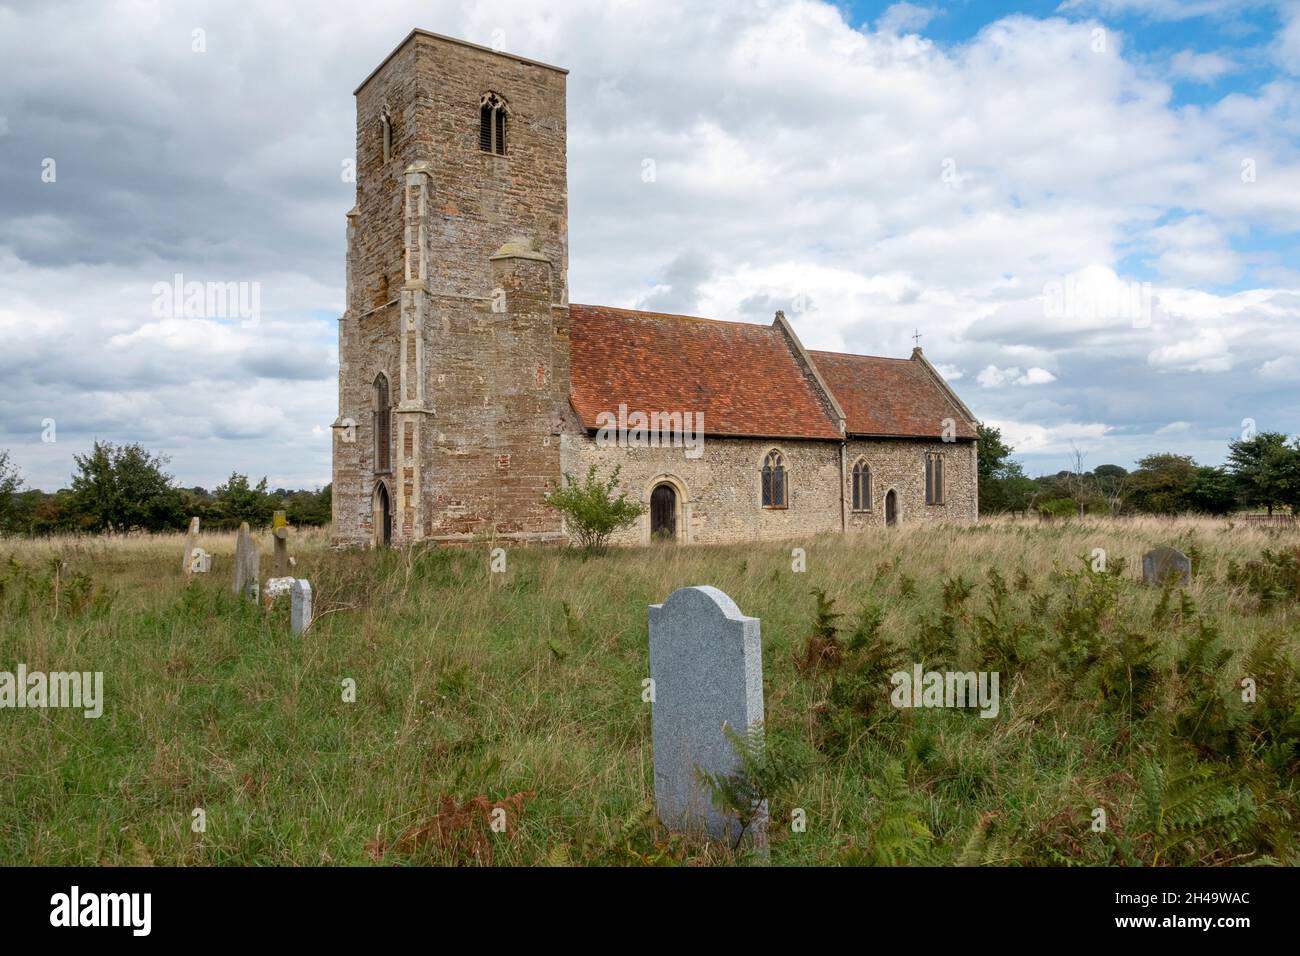 Full shot of St John the Baptist's Church Wantisden, Suffolk, looking across a long grass covered graveyard with slab headstones Stock Photo